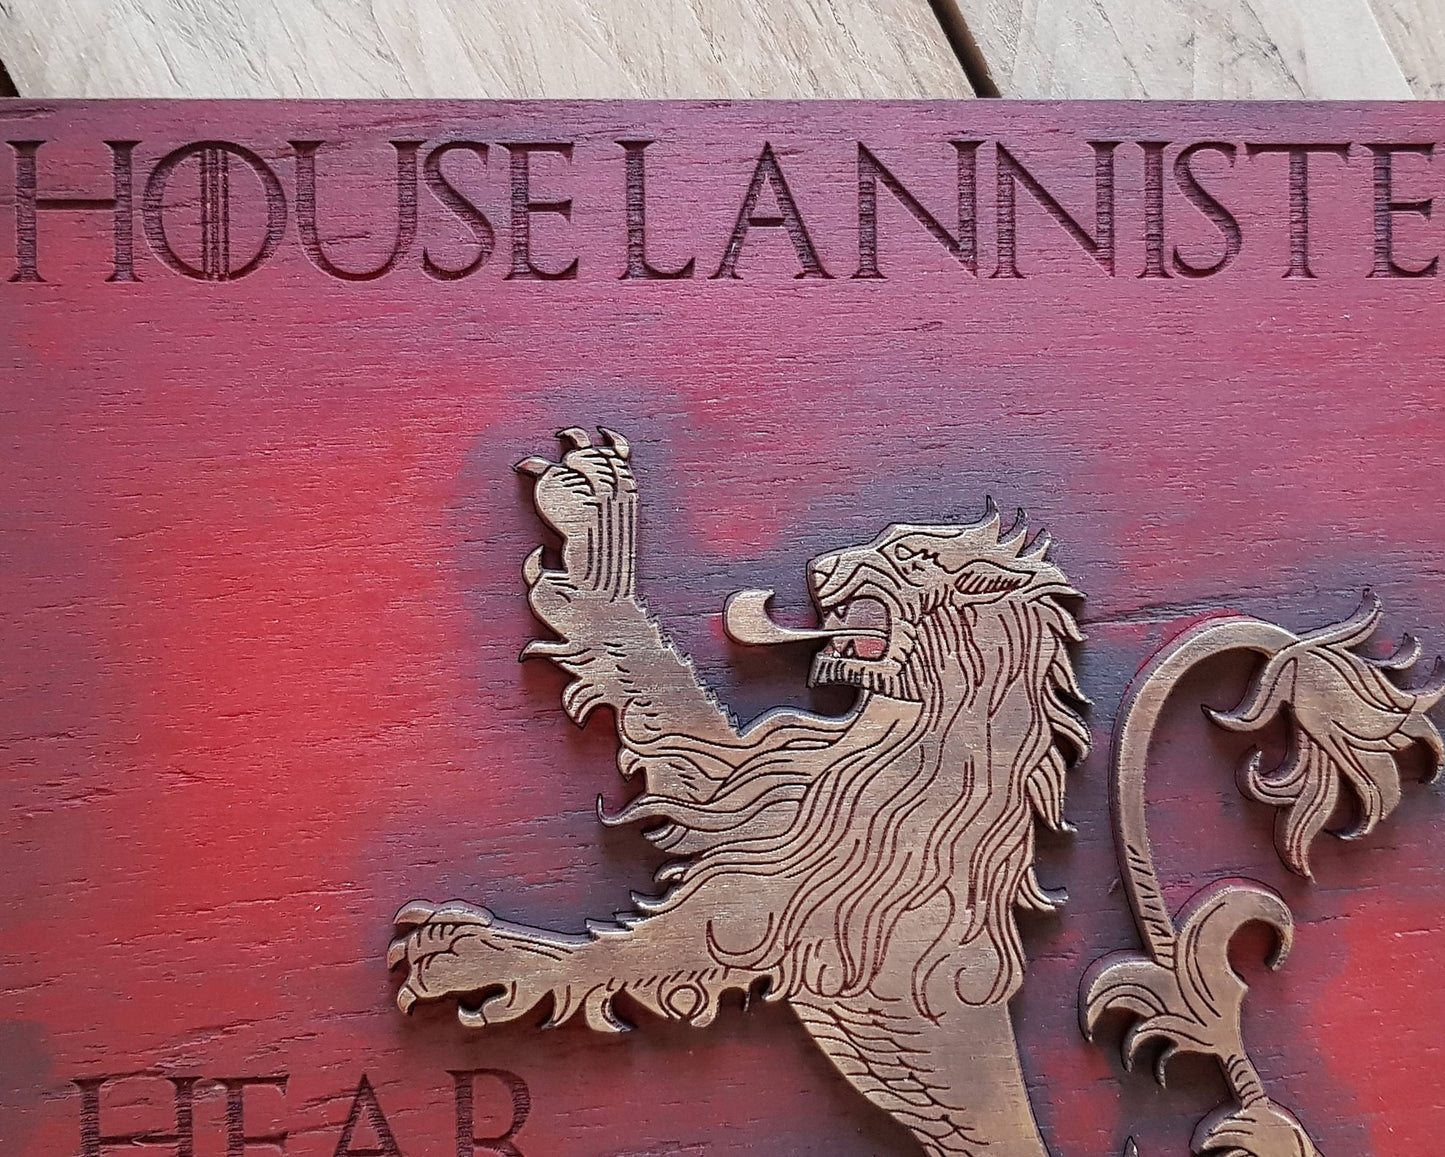 Lannister House, Banner wood sign of Game of Thrones.